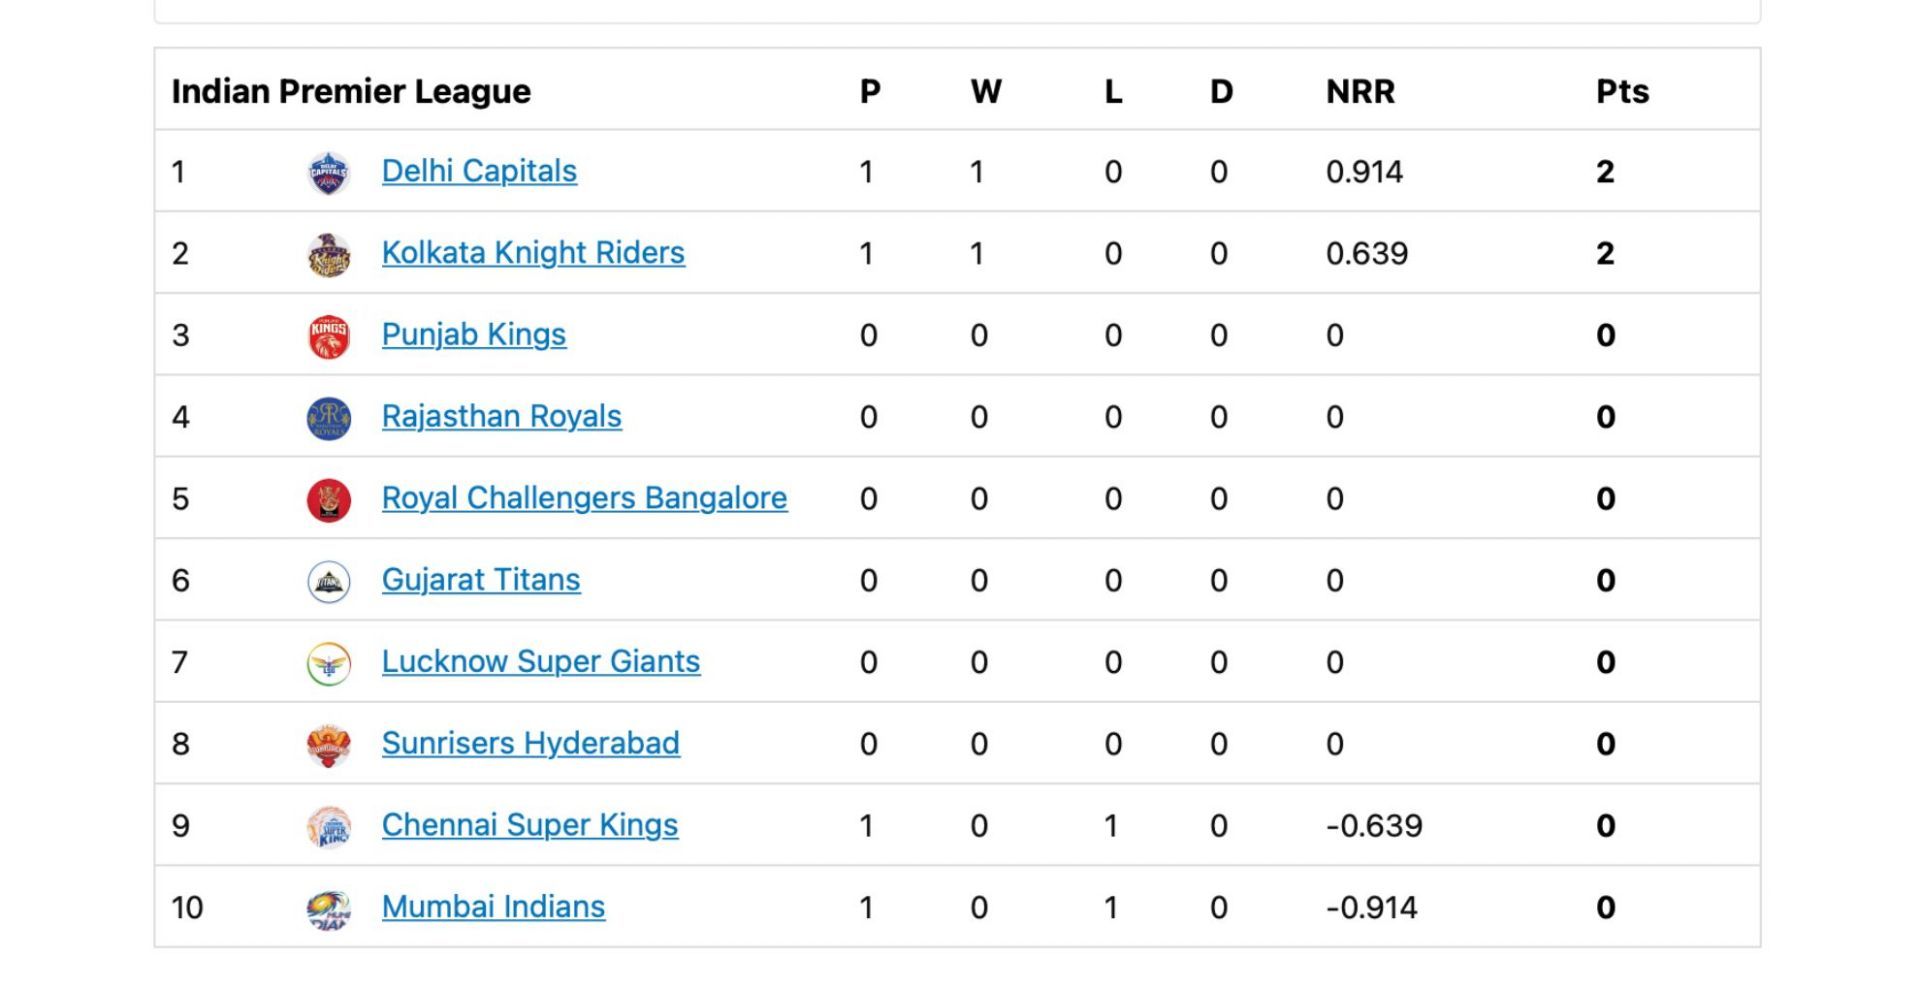 Updated standings after DC beat MI by four wickets